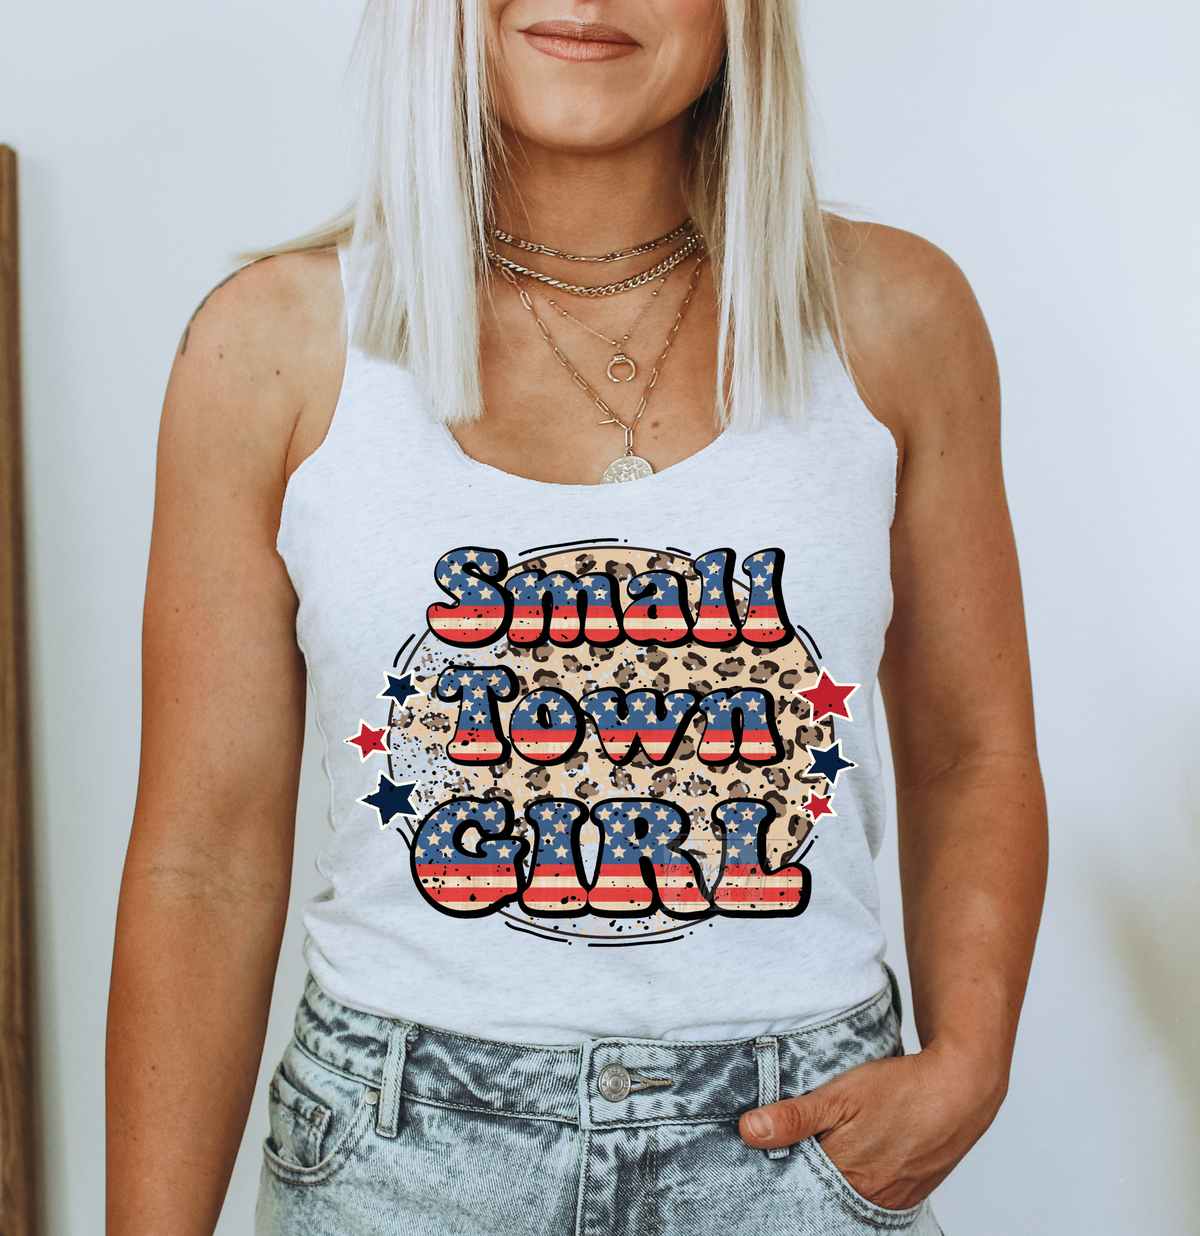 Small Town Girl Red White Blue Leopard circle  size ADULT 11.5x9.8 DTF TRANSFERPRINT TO ORDER